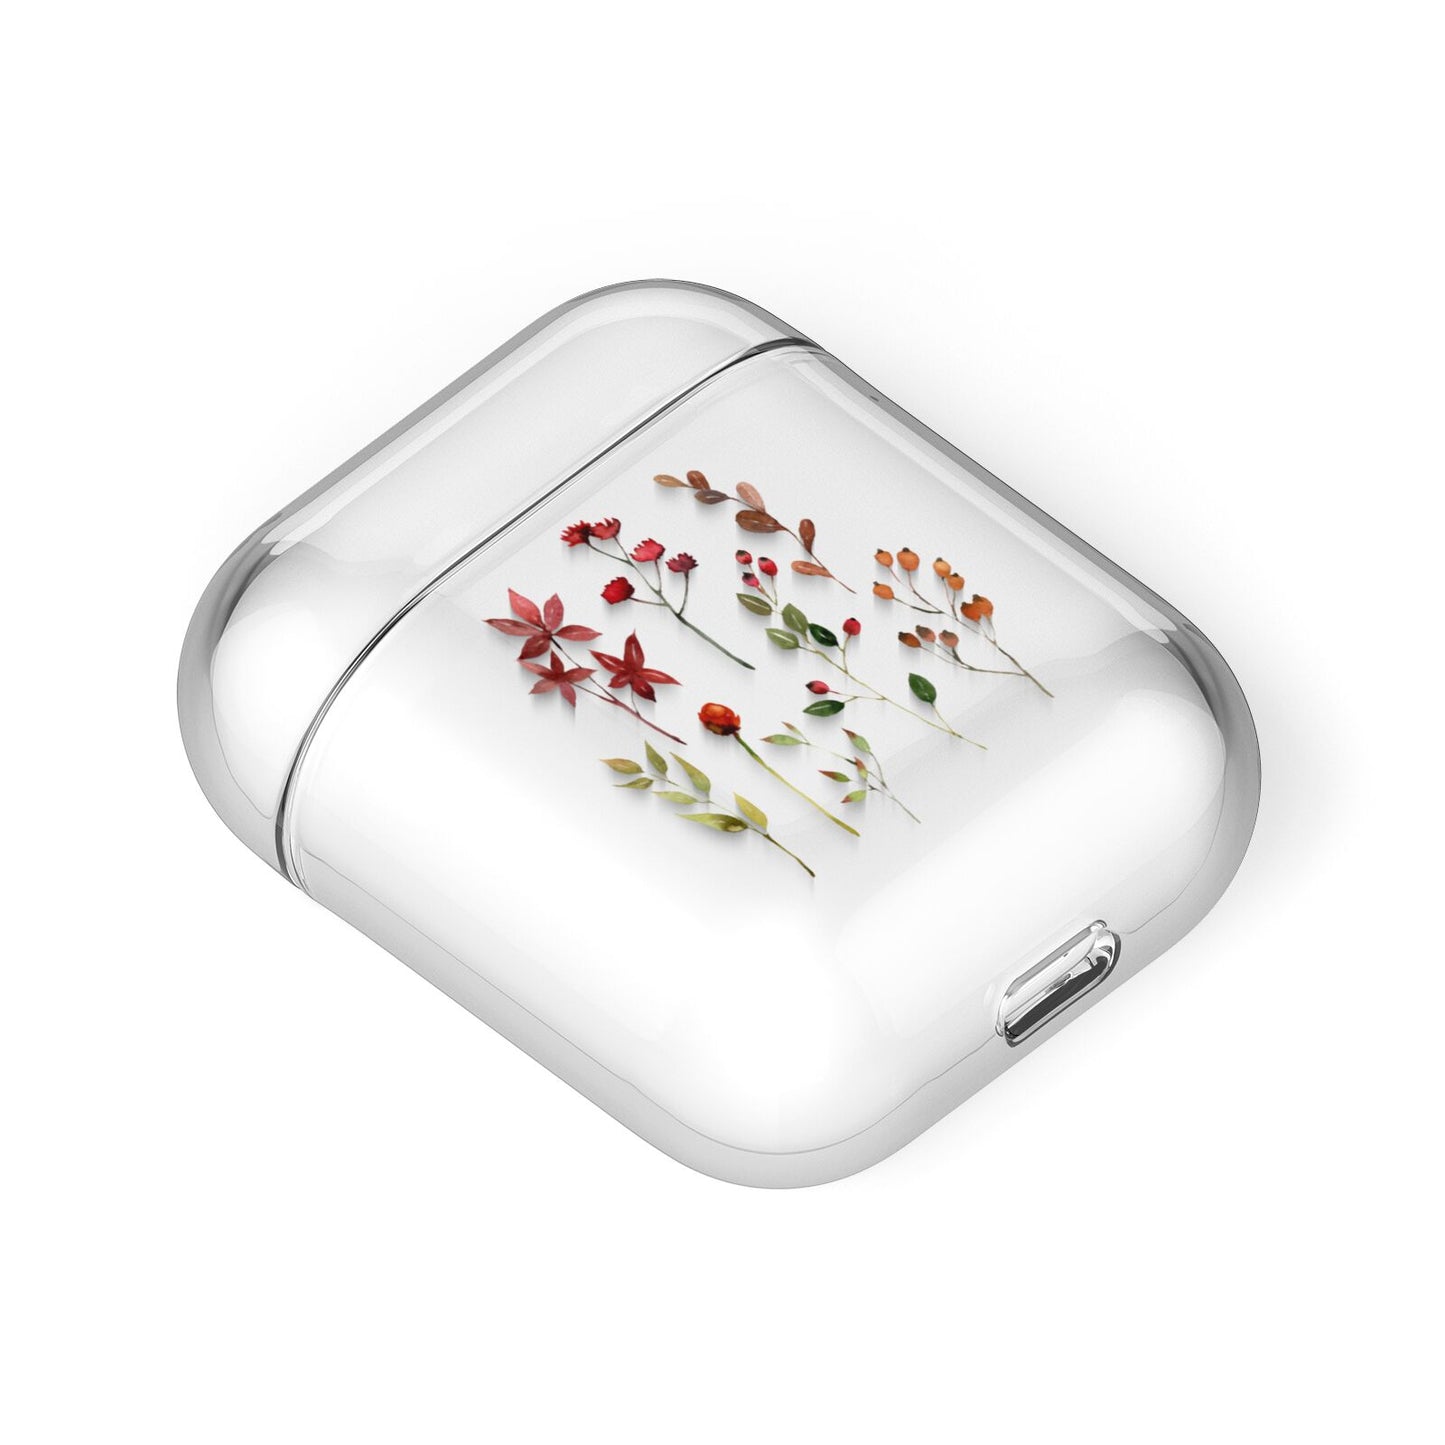 Watercolour Flowers and Foliage AirPods Case Laid Flat